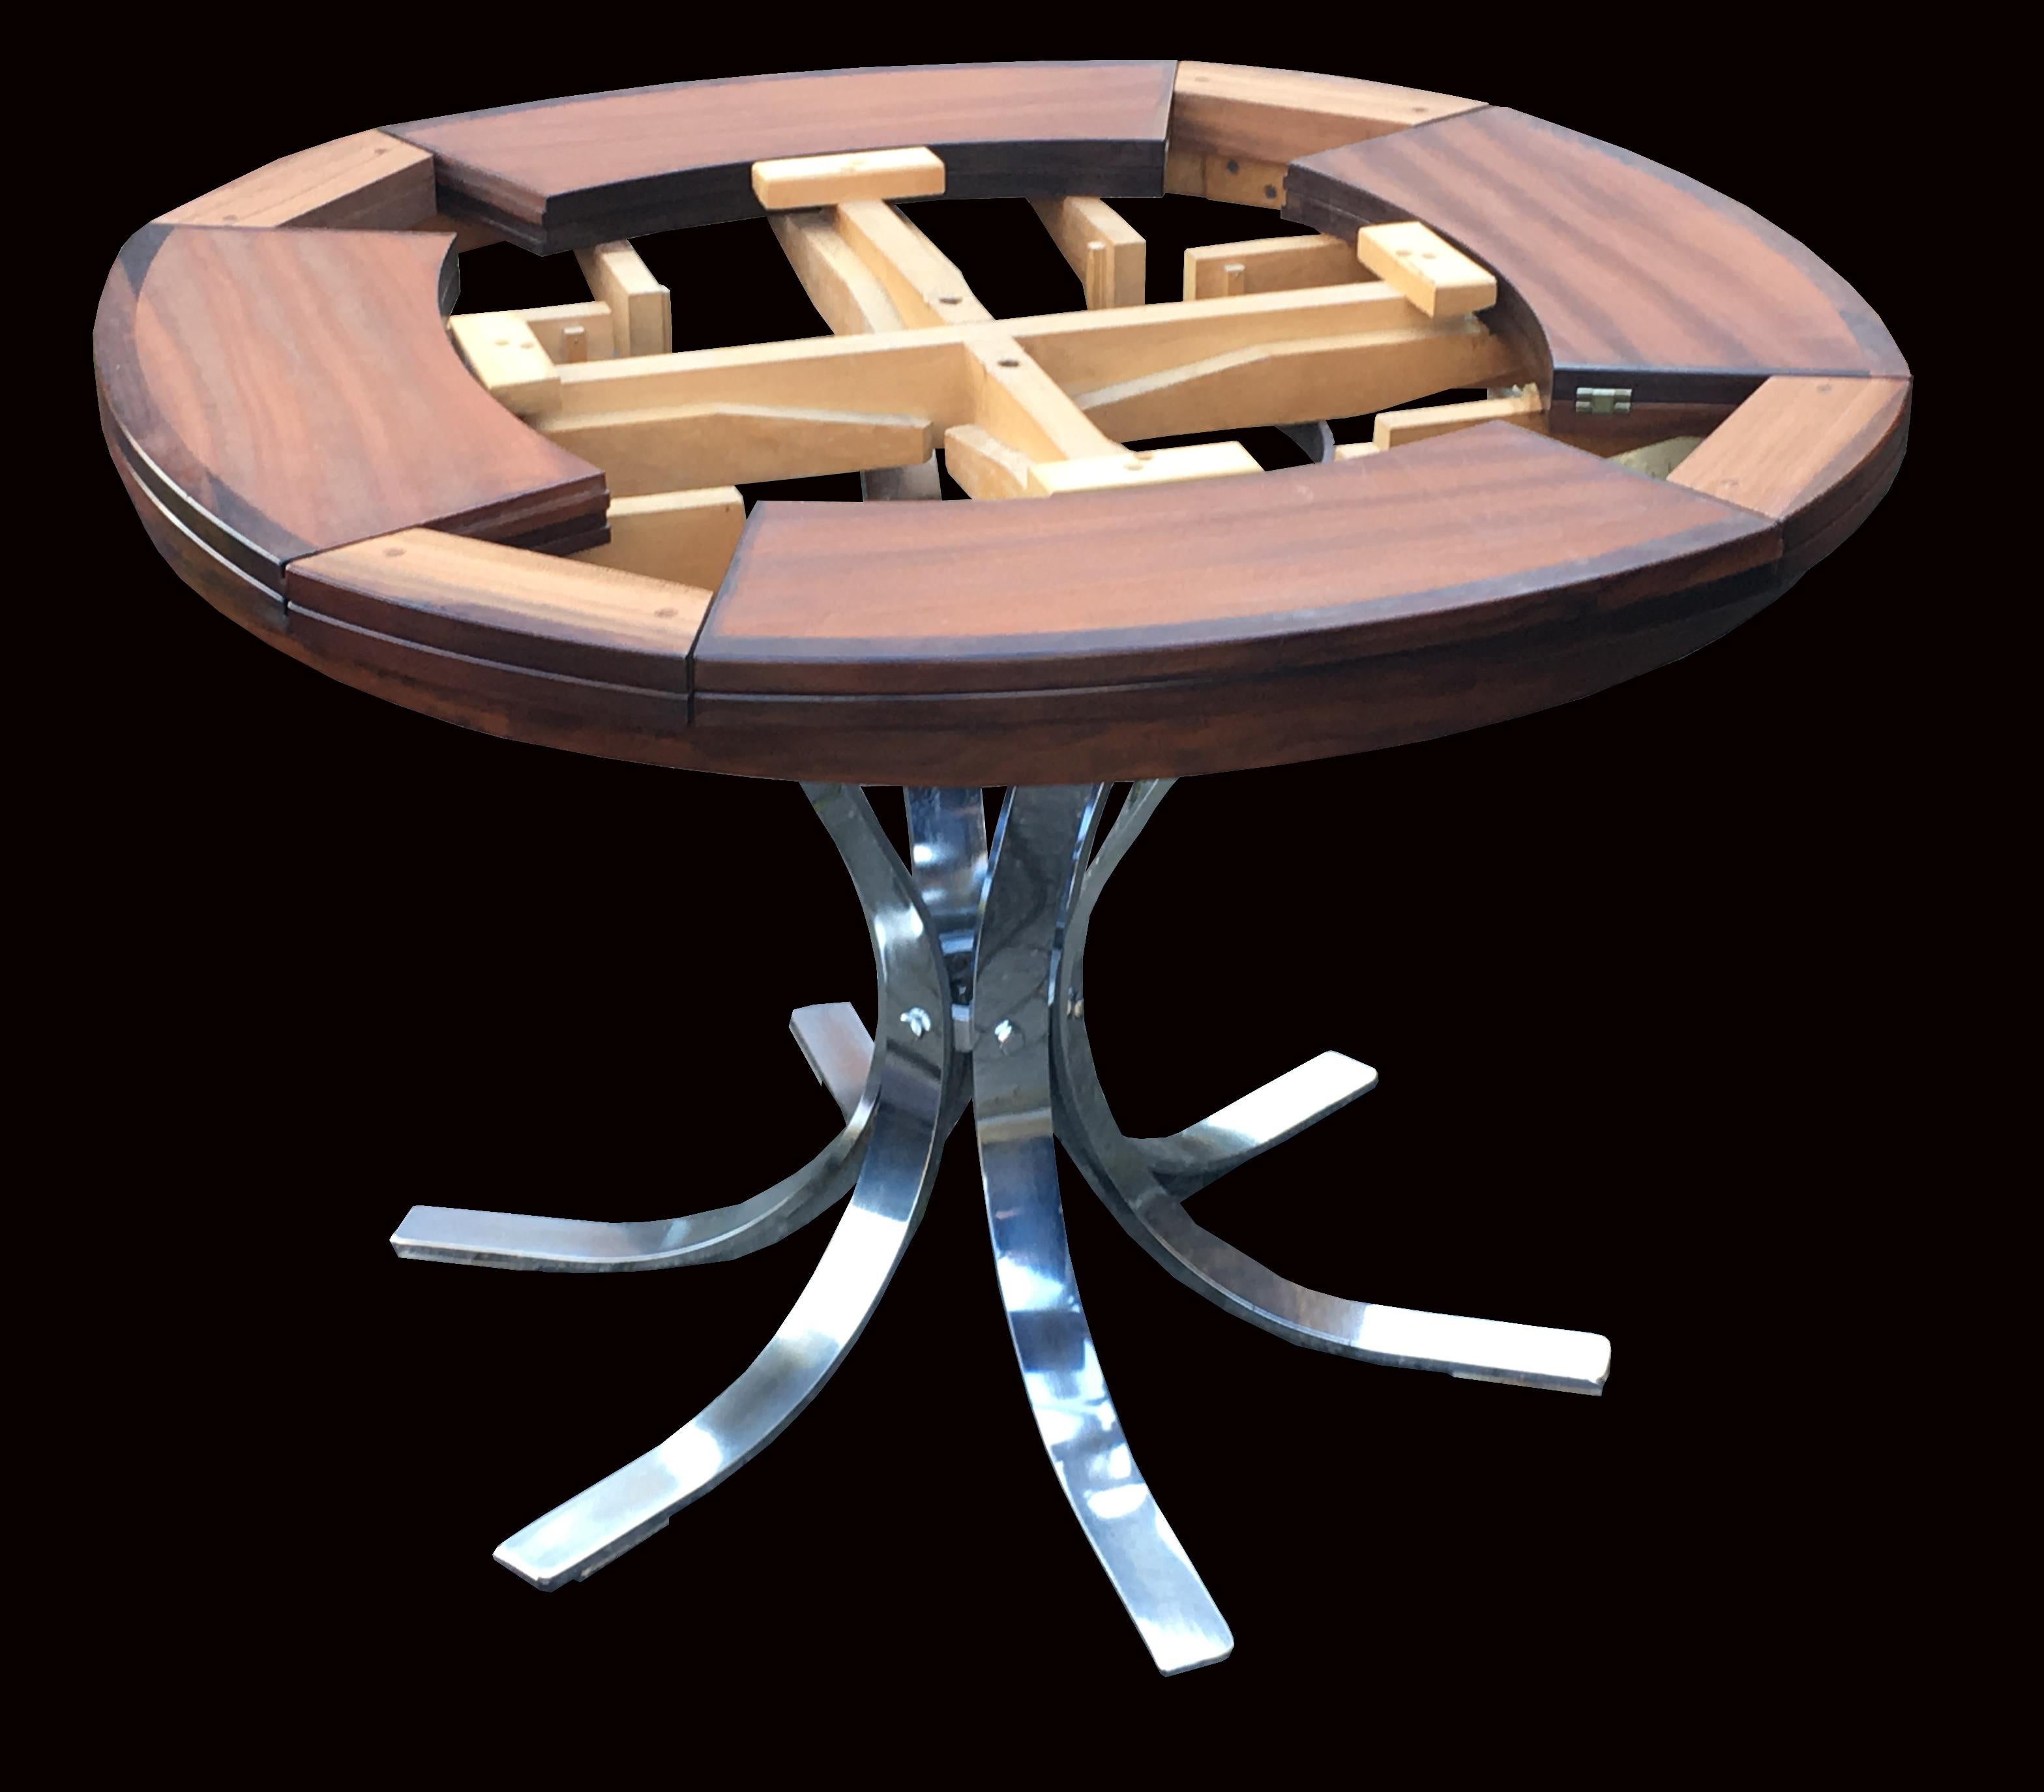 A fine example of this table, being the most sought after in every way, best size (110 cm Diameter closed and 150 cm Diameter open), the best Timber option (Rosewood) and the most practical and good looking base, (the Chrome version) which allows